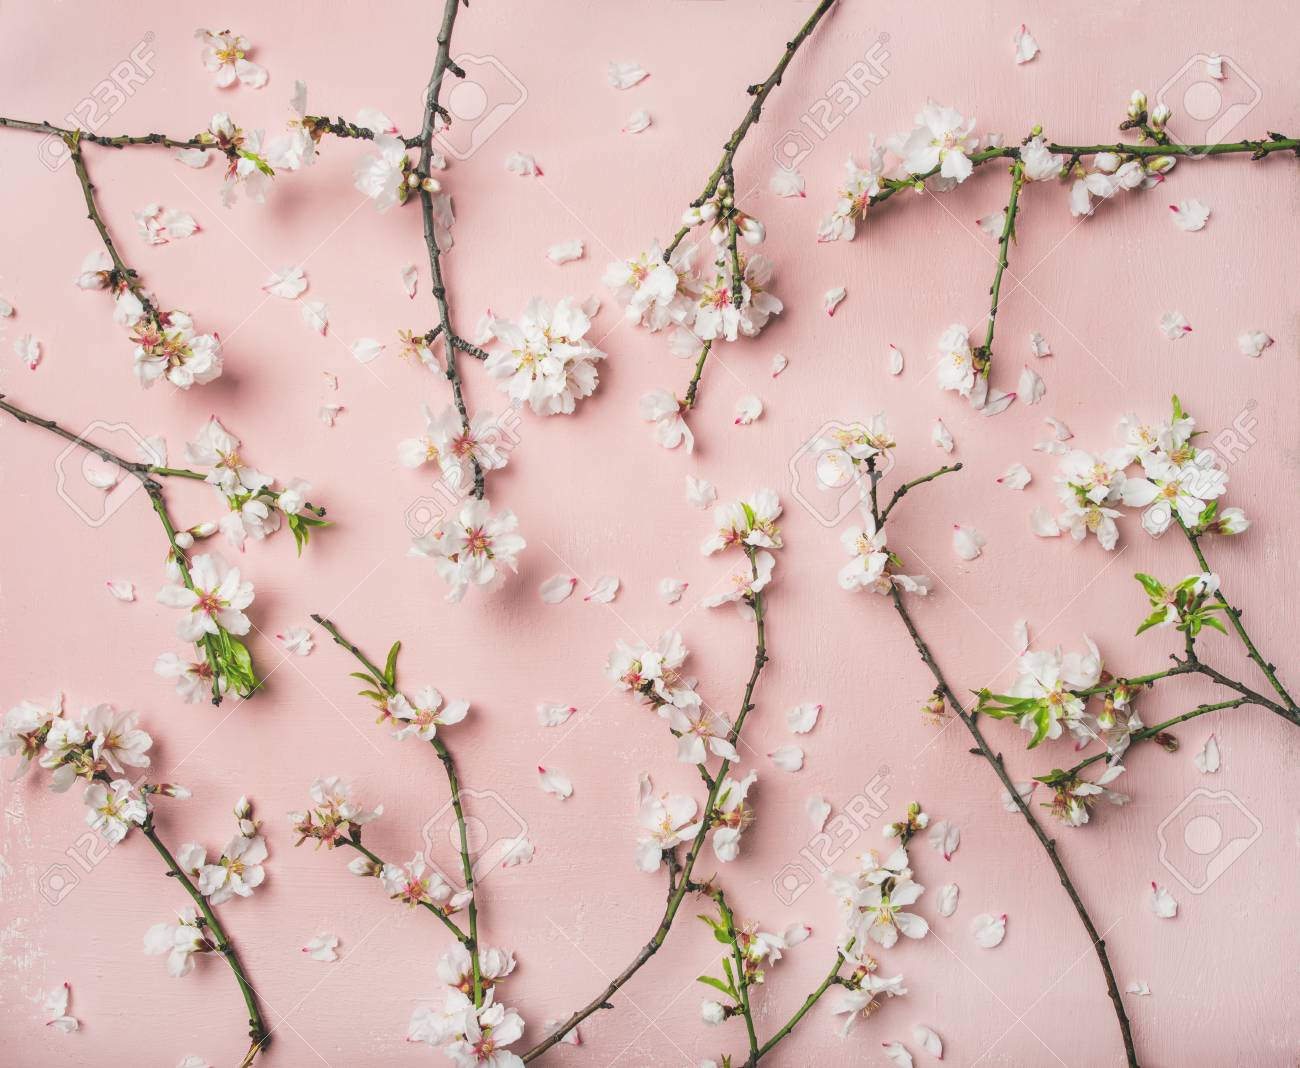 Spring Floral Background Texture And Wallpaper Flat Lay Of